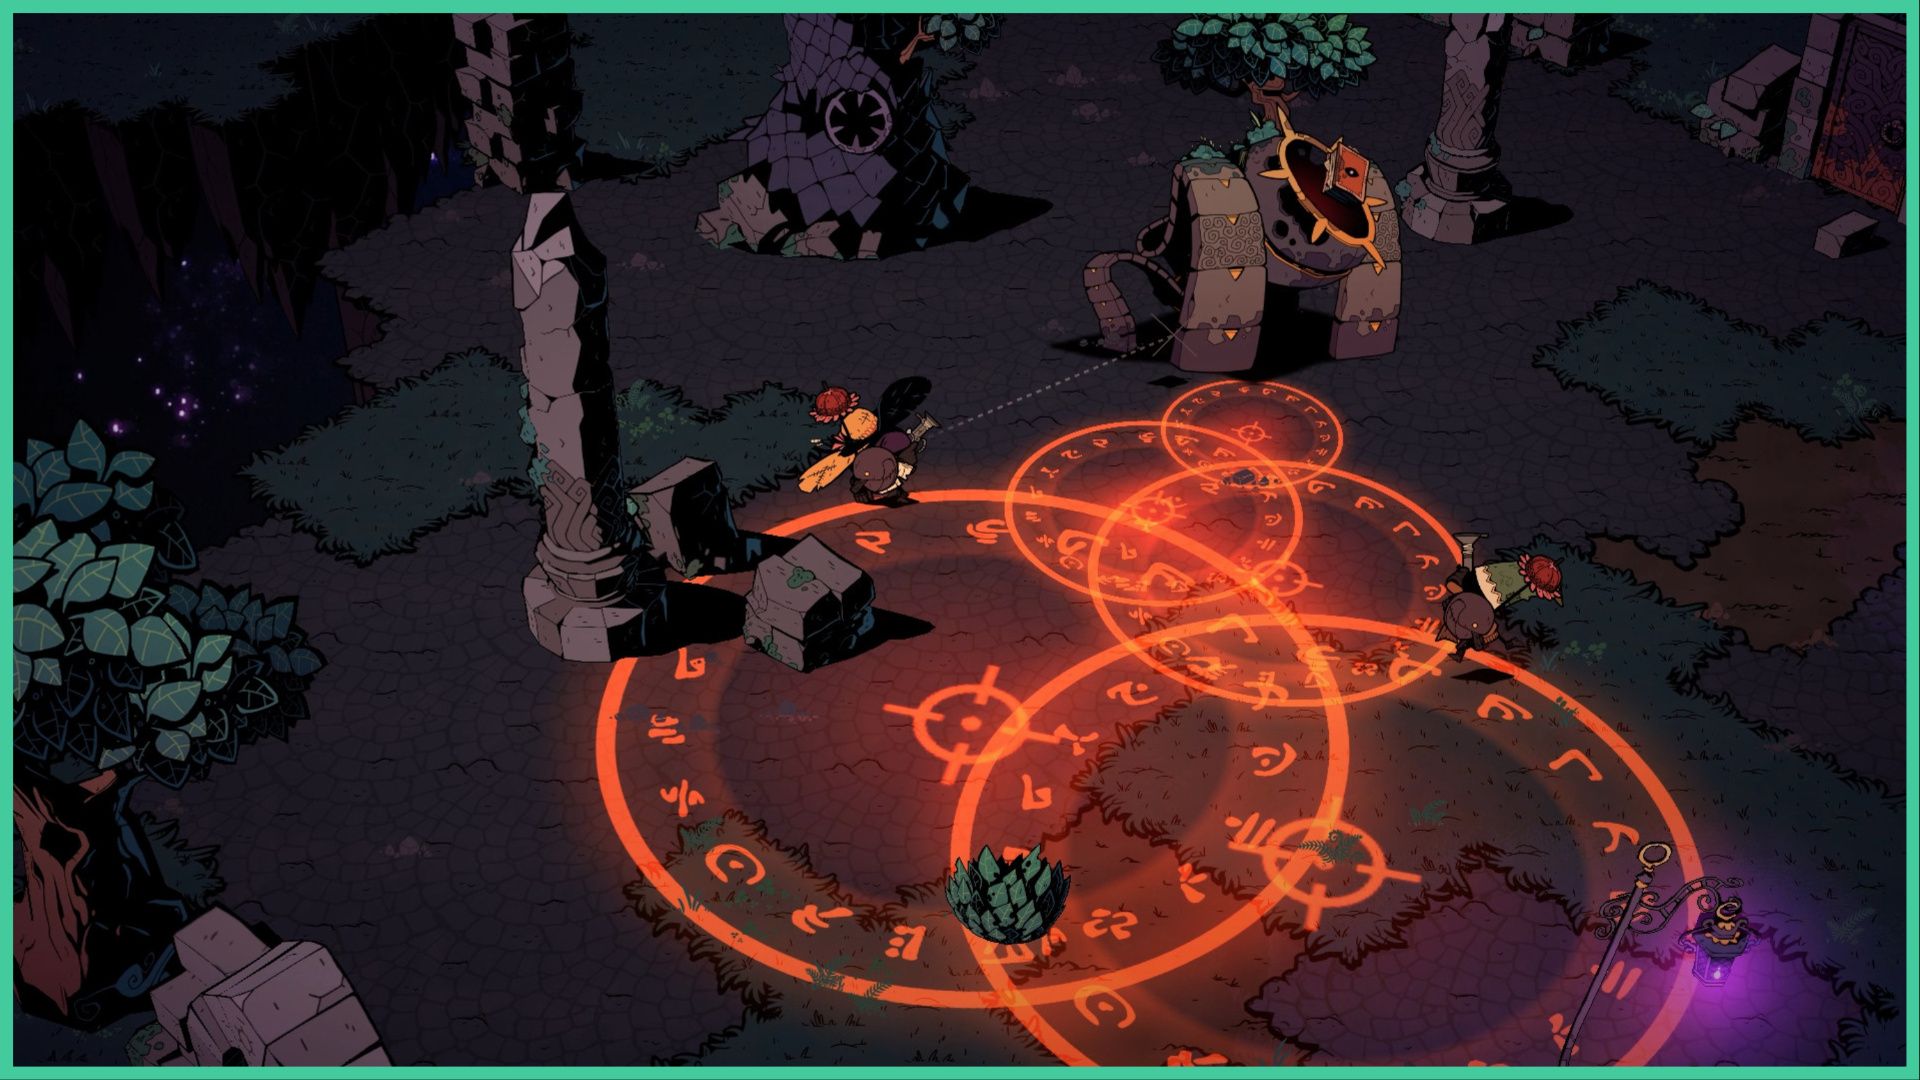 feature image for our wizard with a gun news, the image features a screenshot from the game of the wizard character battling against a robor creature, there are runes on the ground which seem to be where the creature is aiming its attacks, there are stone sculptures surrounding them, there are also patches of grass and a few trees, with a glowing purple lantern at the bottom of the image